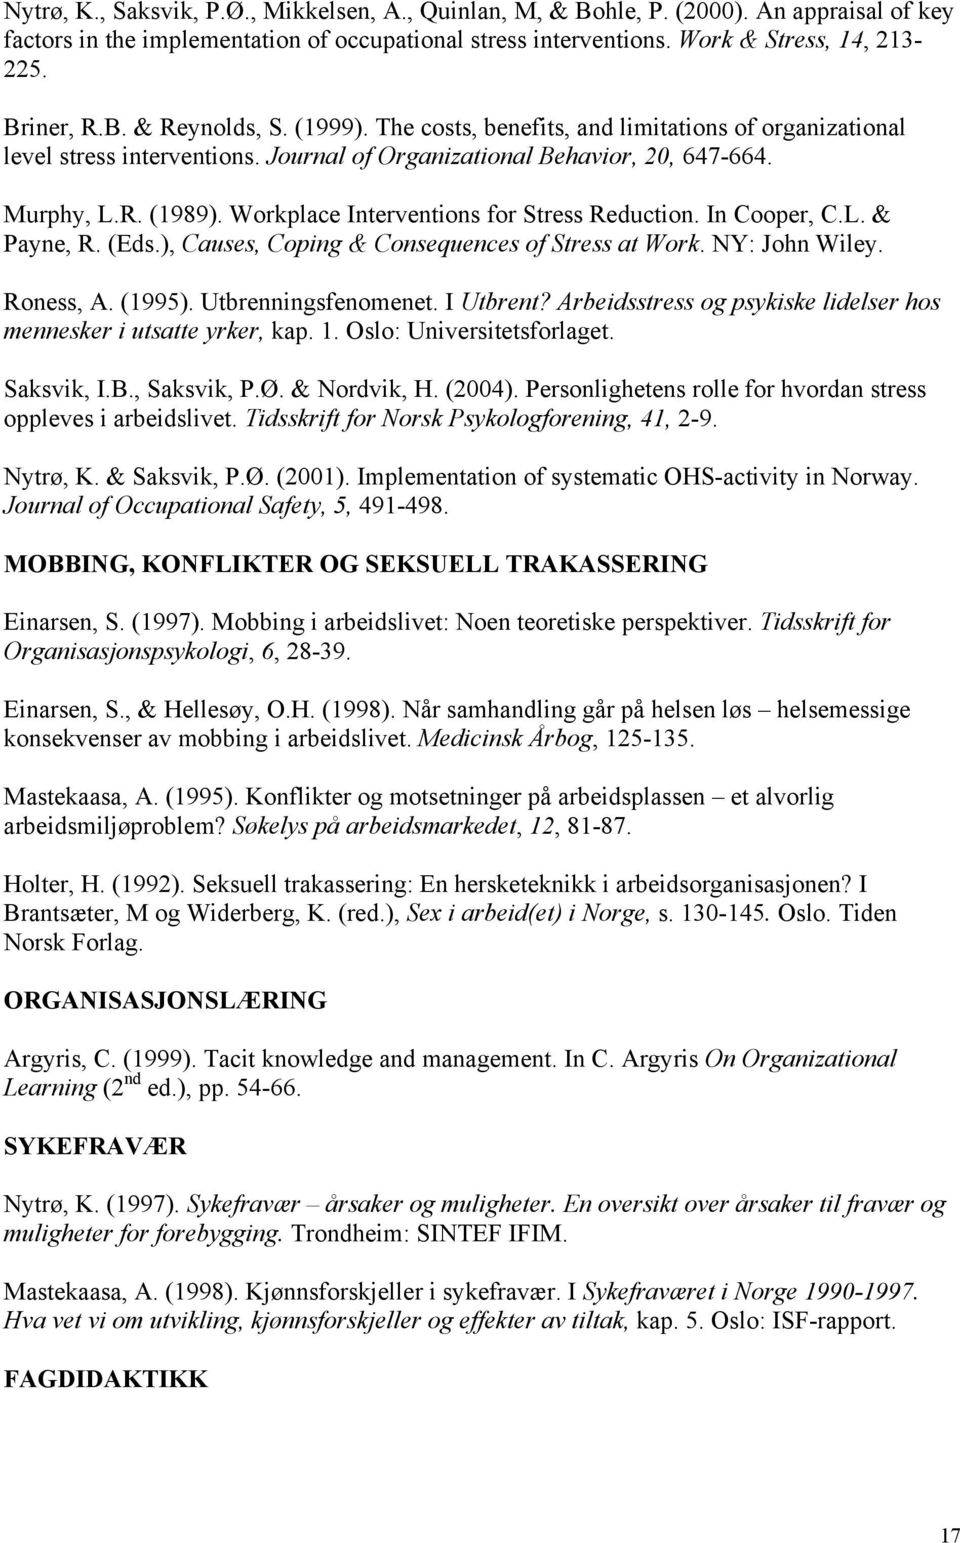 Workplace Interventions for Stress Reduction. In Cooper, C.L. & Payne, R. (Eds.), Causes, Coping & Consequences of Stress at Work. NY: John Wiley. Roness, A. (1995). Utbrenningsfenomenet. I Utbrent?